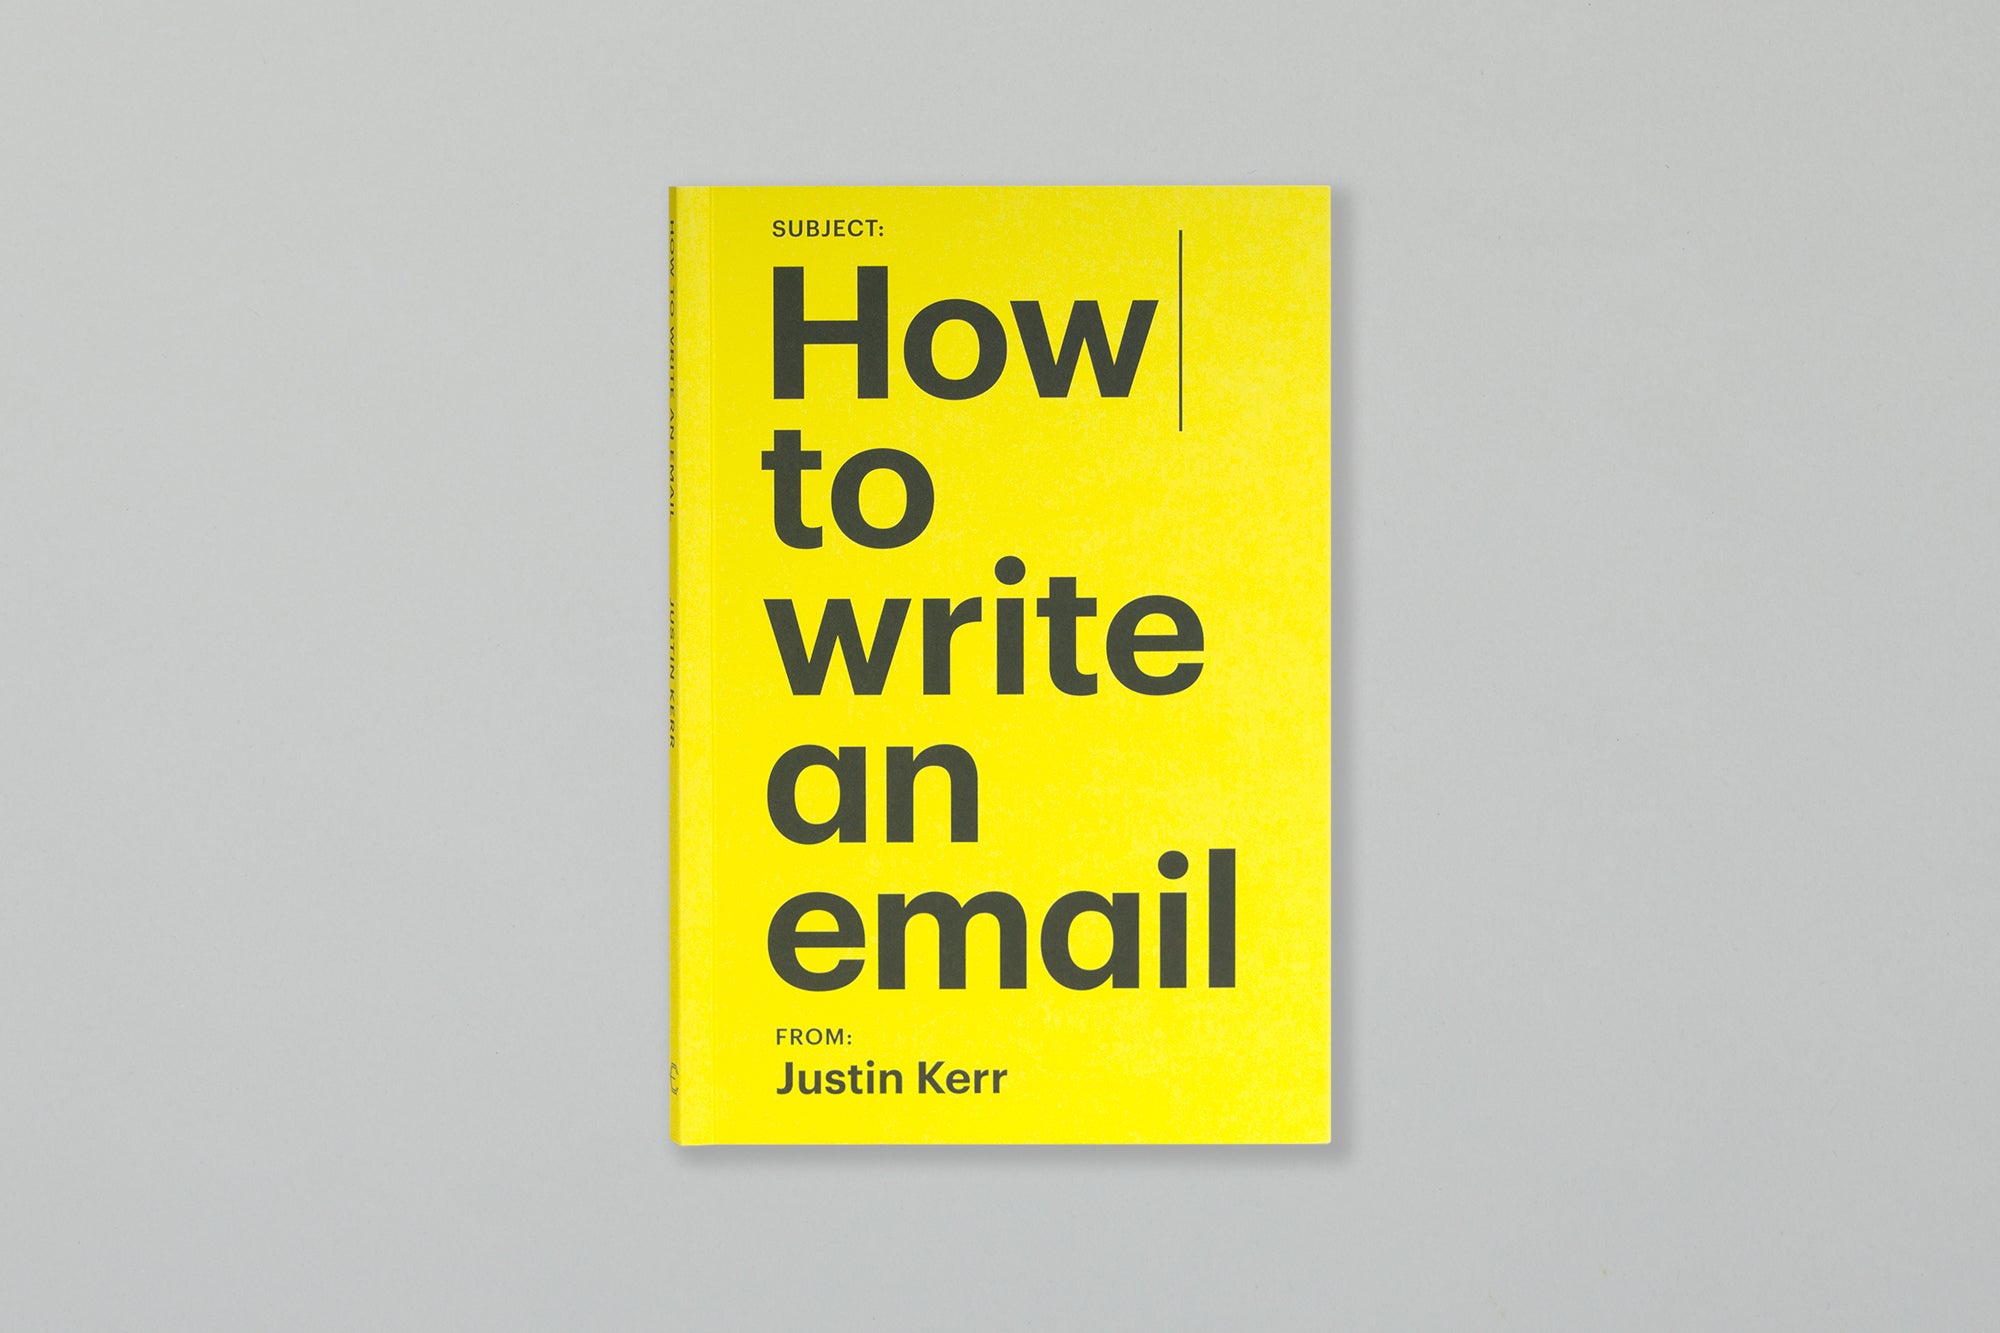 How to write an email: Second Edition